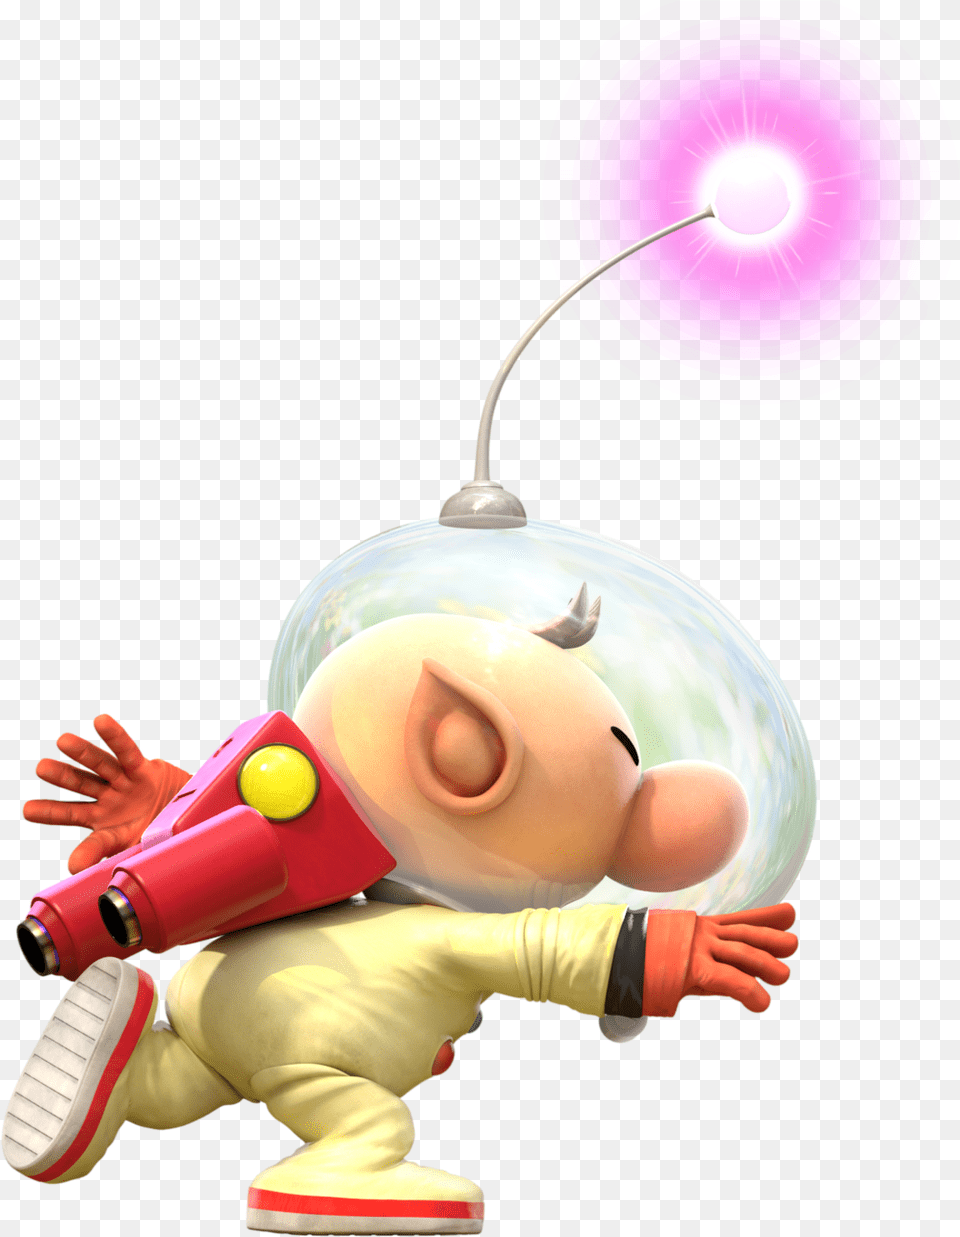 Pikmin Image With No Pikmin, Balloon, Toy Free Png Download